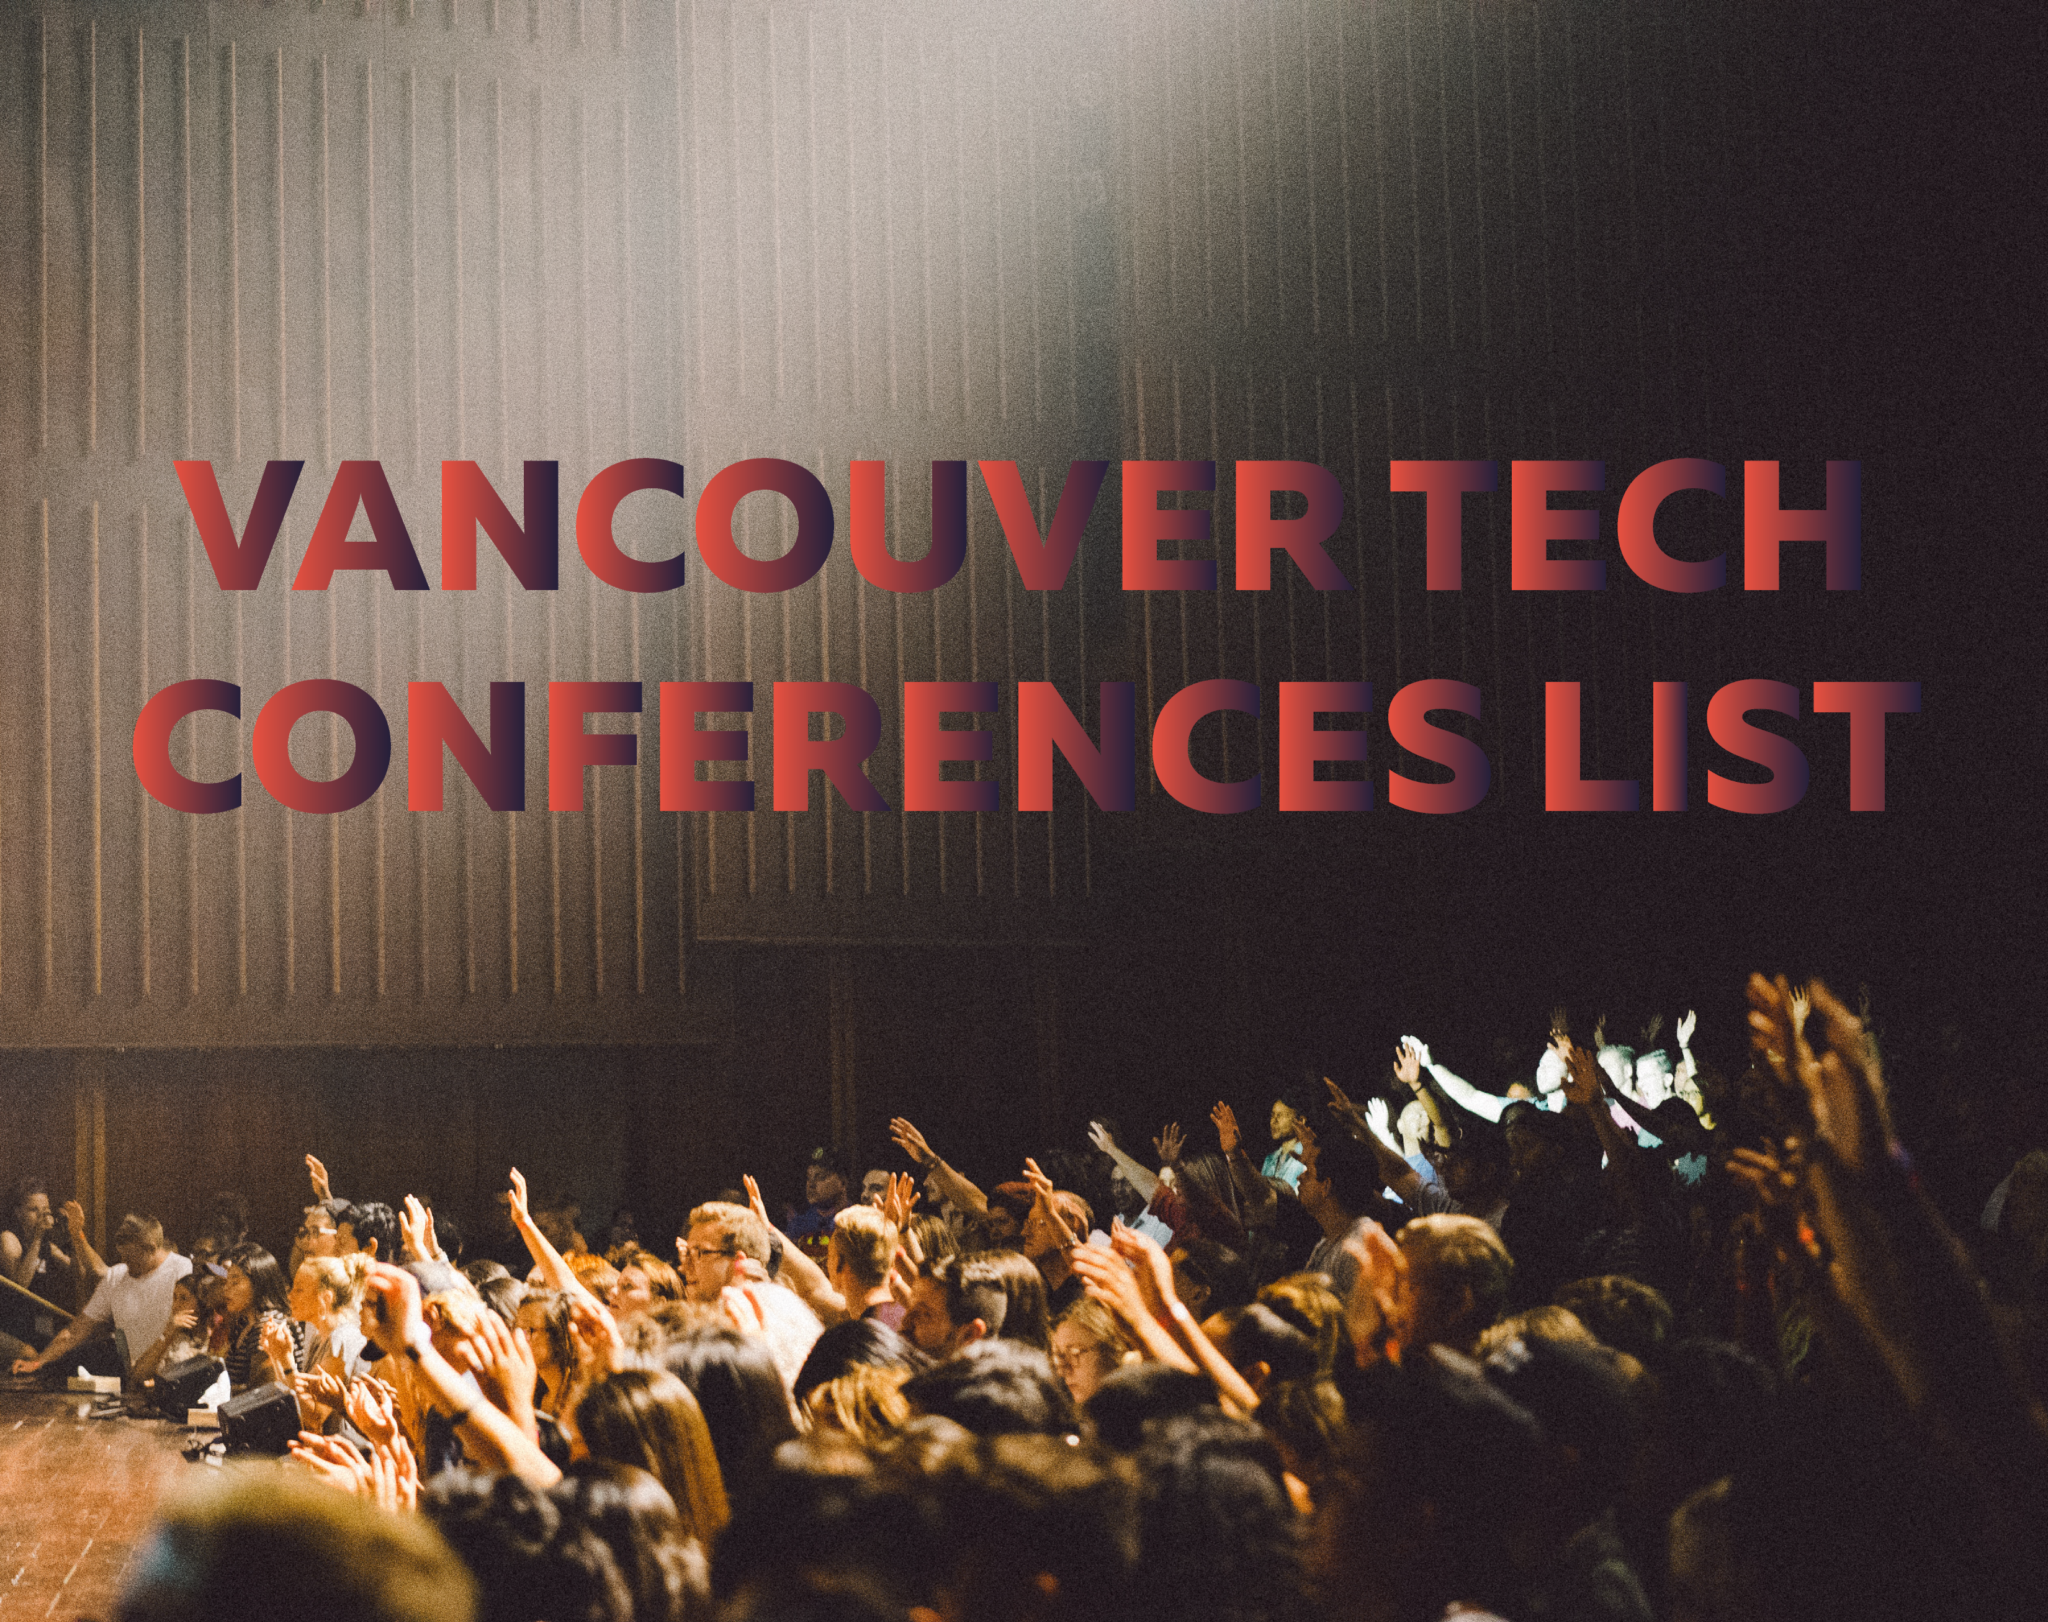 An image of a cheering crowded at a concert with red and black text overlay Vancouver Tech Conference List